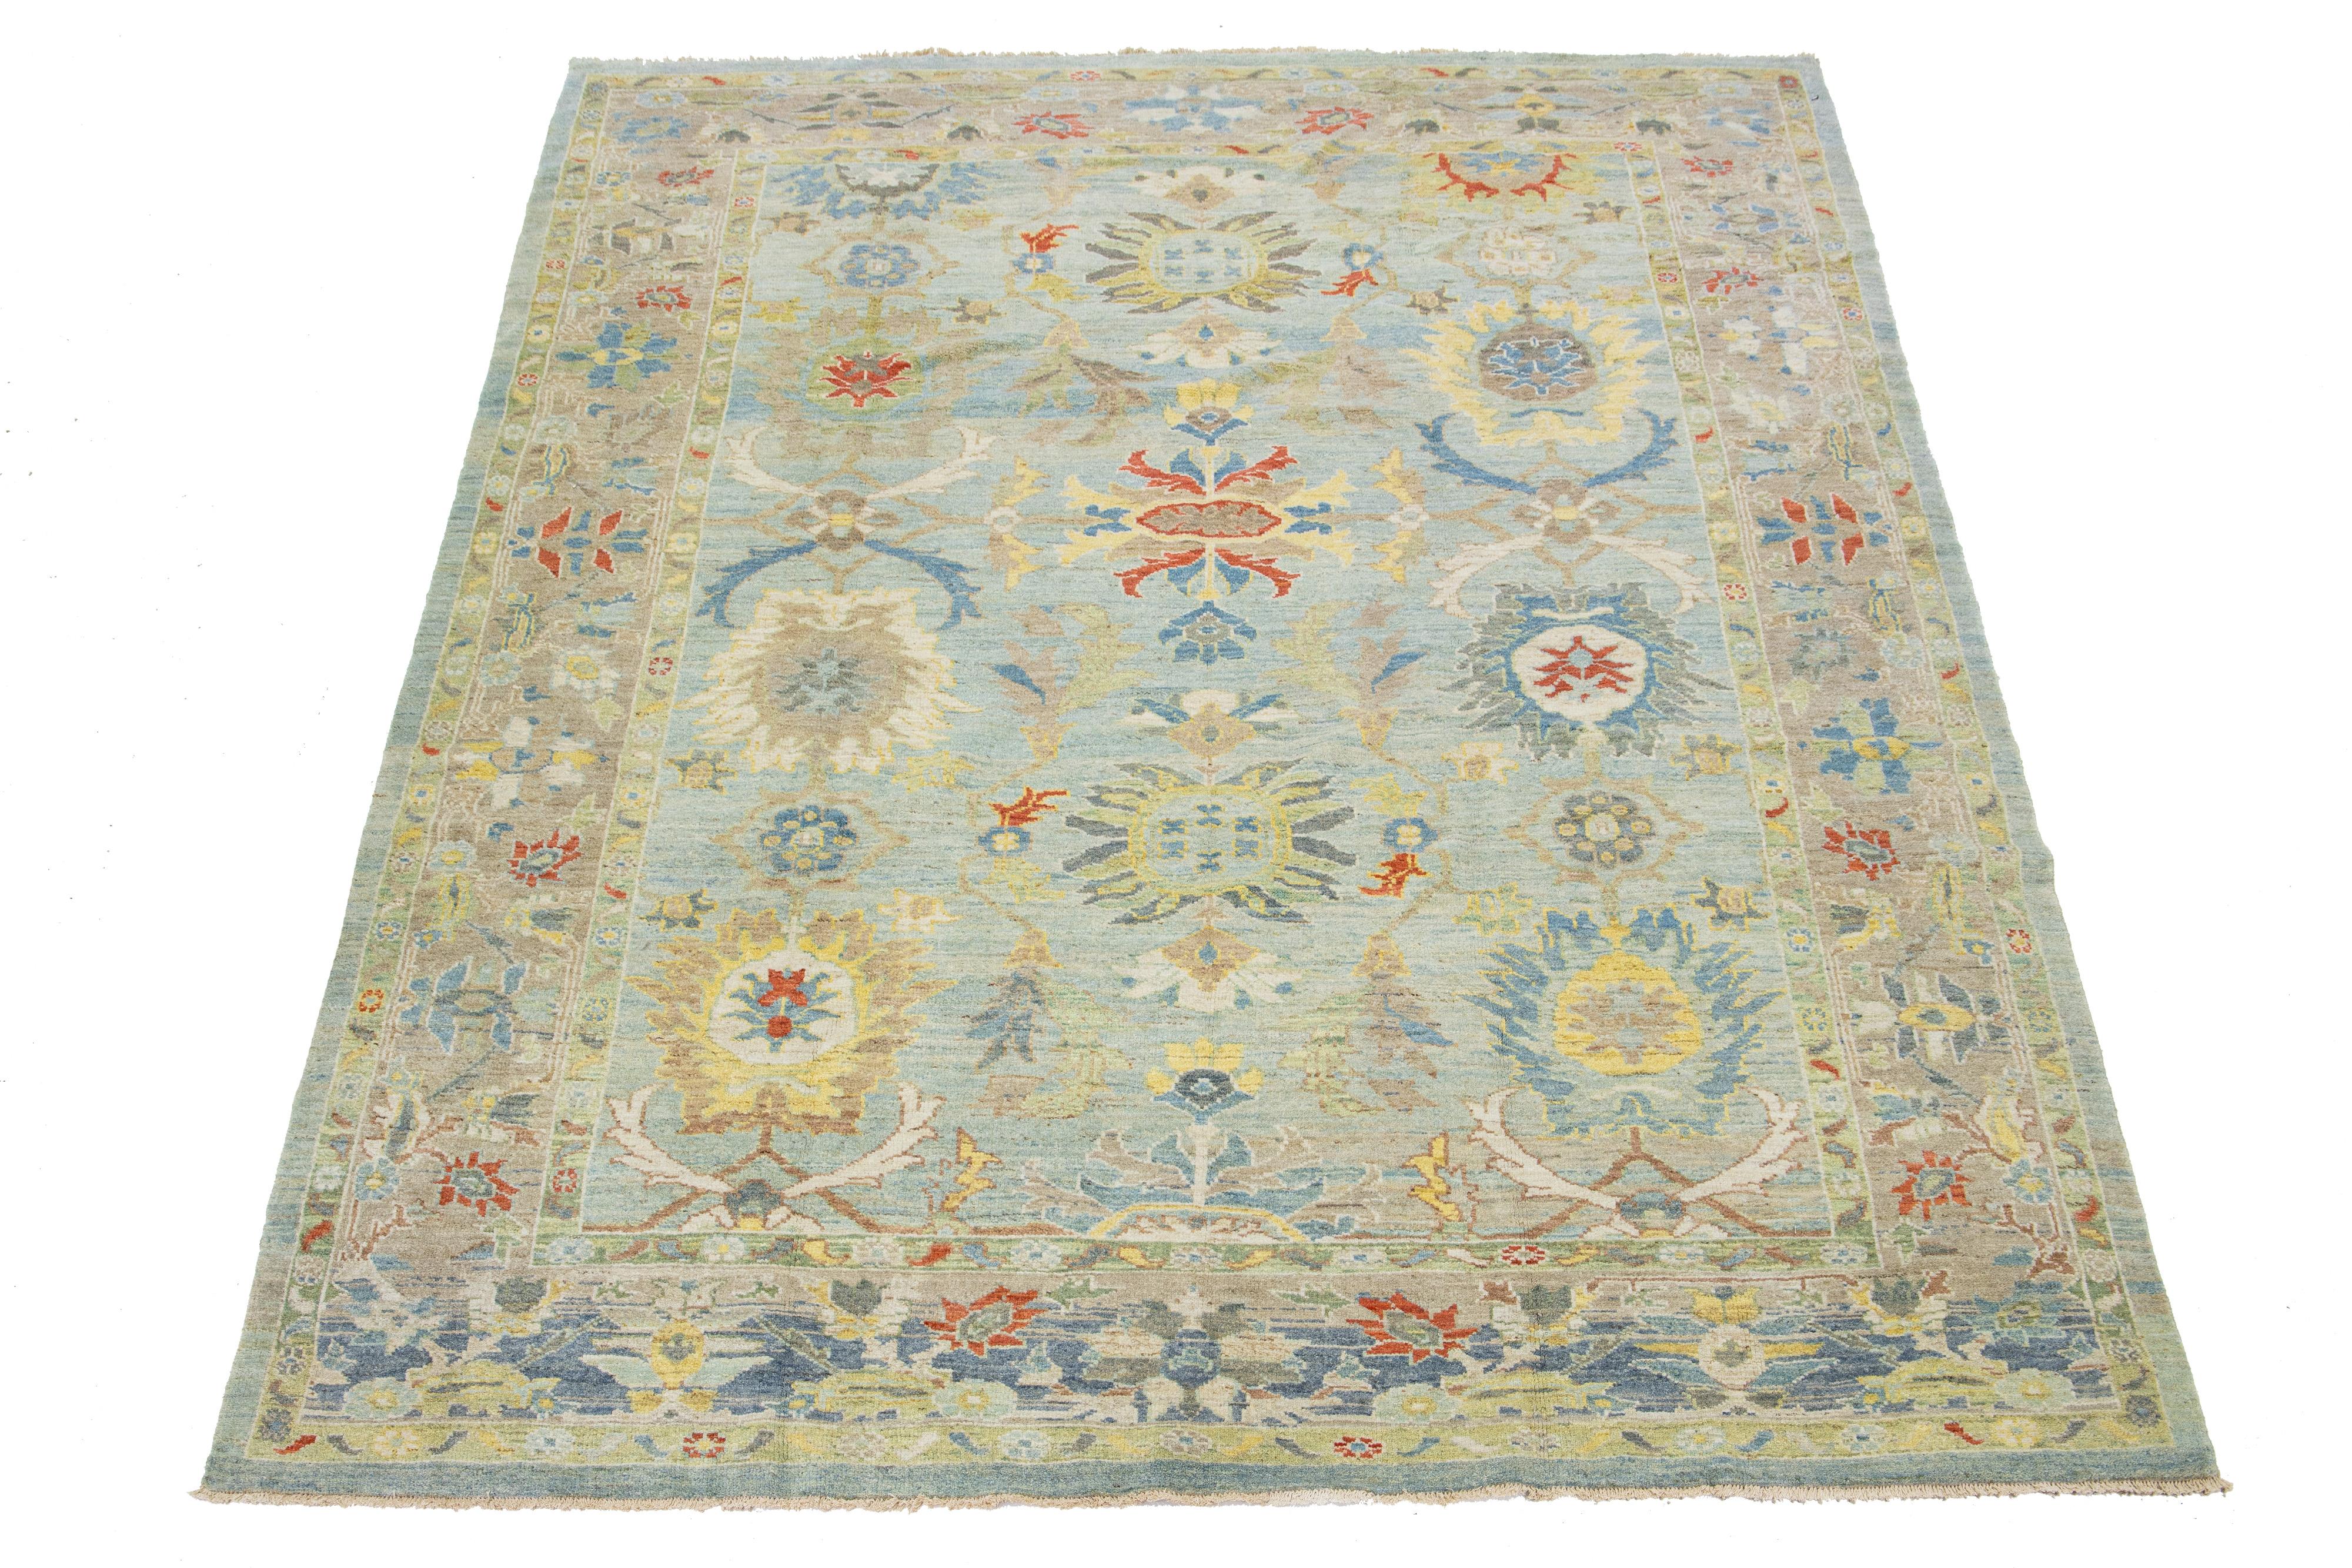 Beautiful modern Sultanabad hand-knotted wool rug with a blue field. This Sultanabad rug has a brown frame and multicolor accents in a gorgeous all-over classic floral pattern design.

This rug measures 8'9